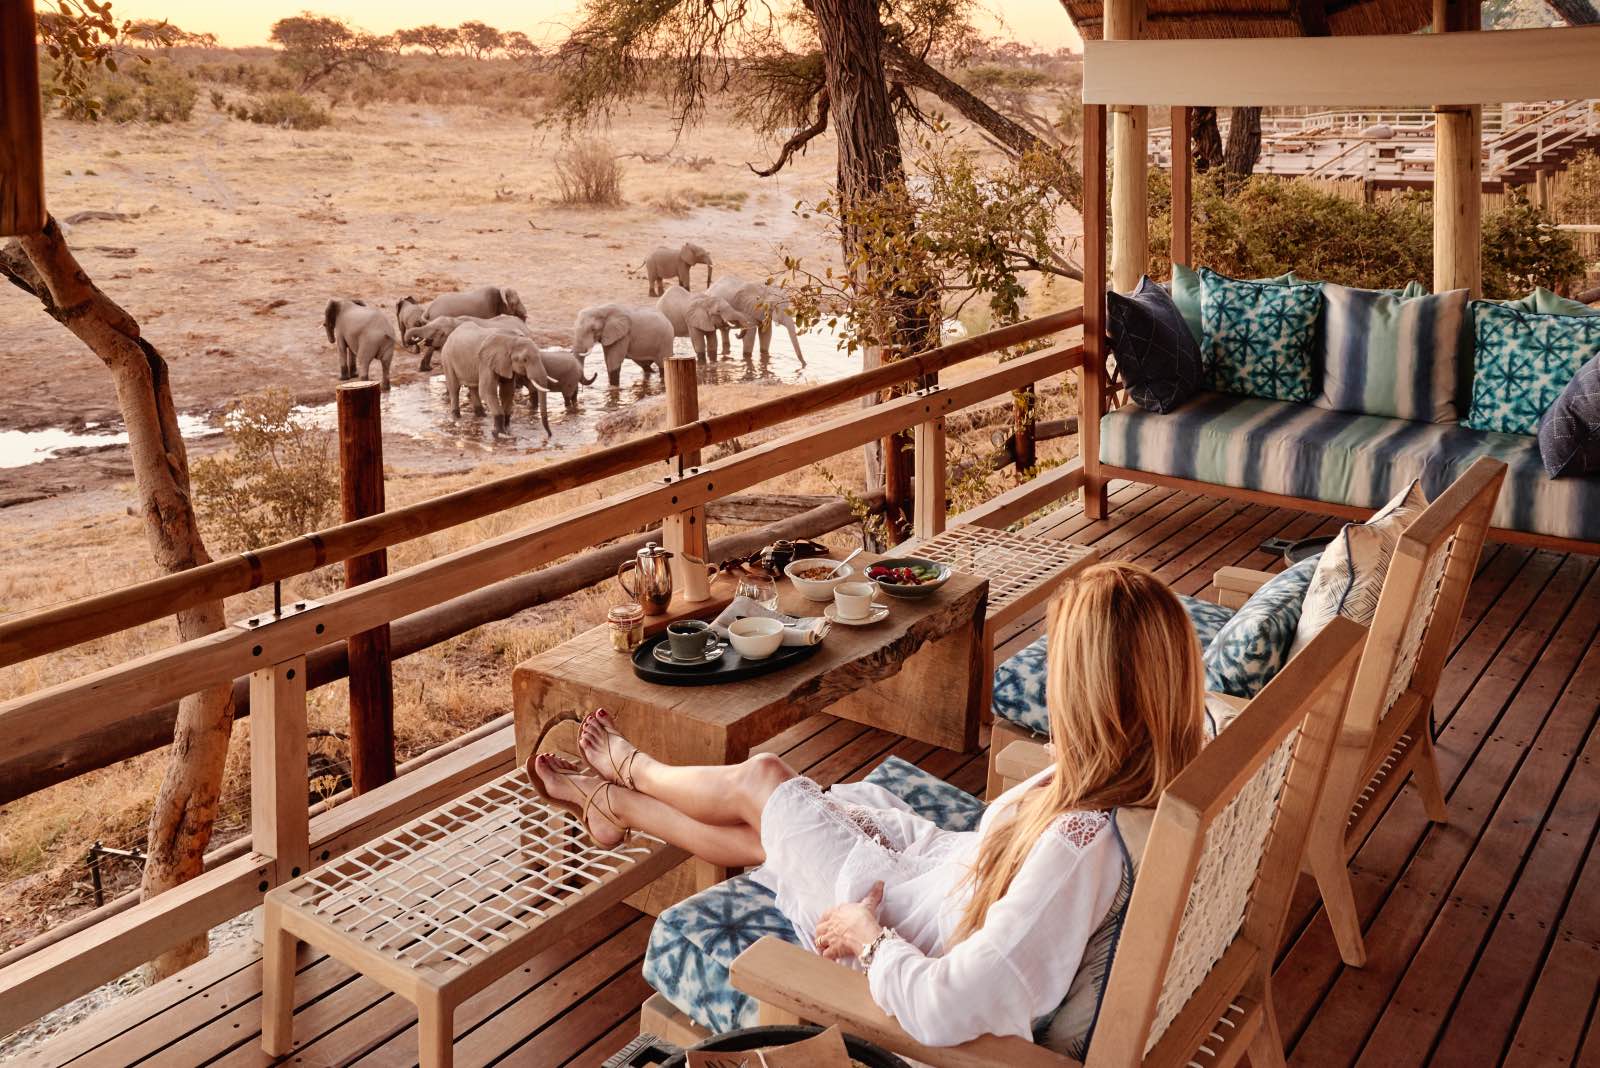 Elephants in front of the lodge while guest looks on at Savute Elephant Lodge